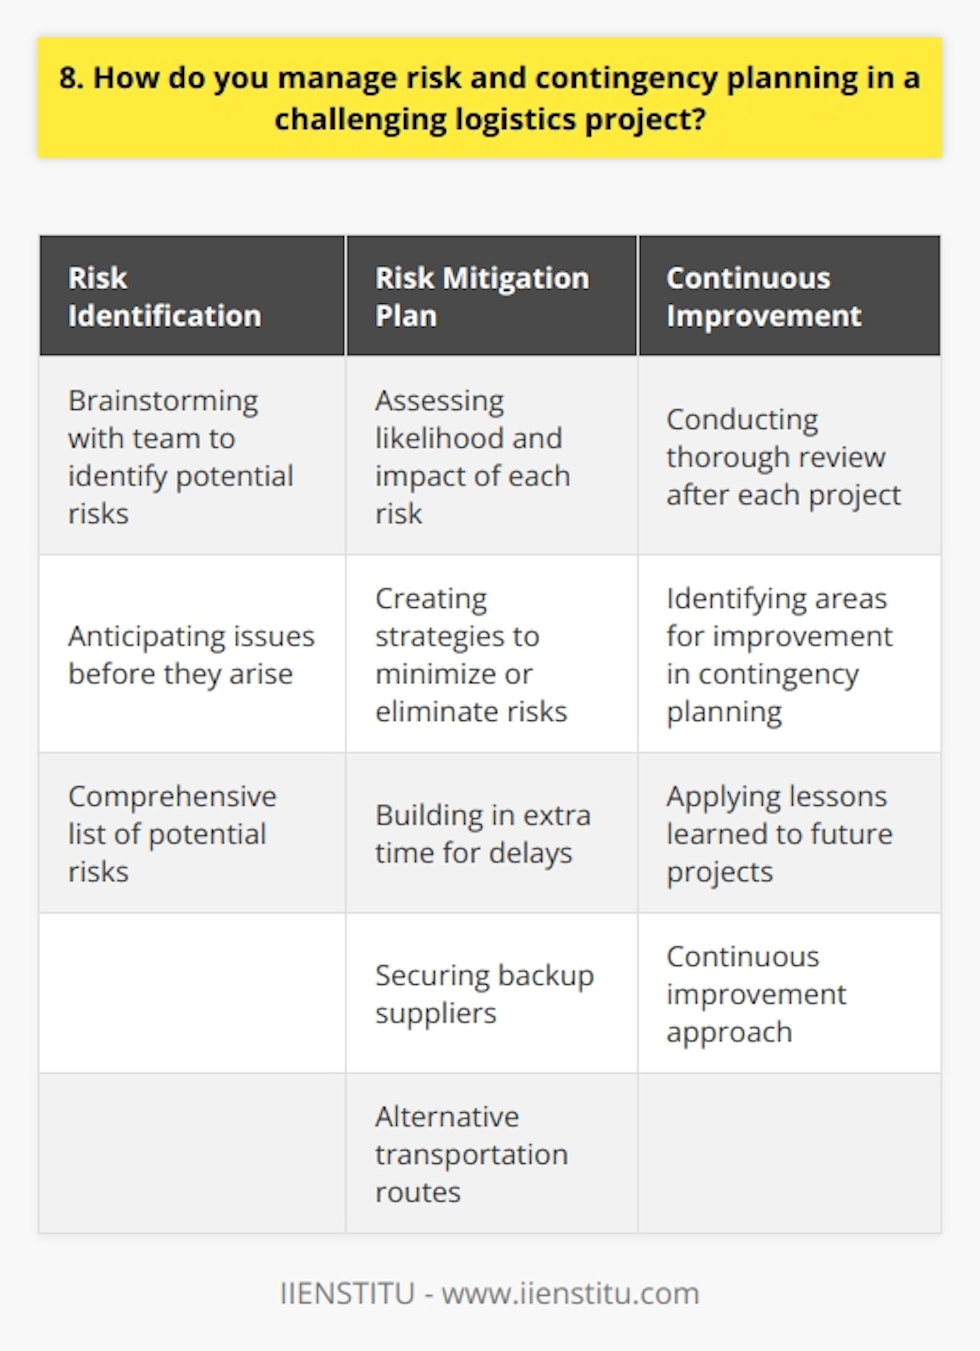 When managing risk and contingency planning in a challenging logistics project, I always start by identifying potential risks. I brainstorm with my team to come up with a comprehensive list of things that could go wrong. This helps us anticipate issues before they arise. Developing a Risk Mitigation Plan Once weve identified the risks, I work with my team to develop a robust risk mitigation plan. We assess the likelihood and impact of each risk, then create strategies to minimize or eliminate them. This might involve building in extra time for delays, securing backup suppliers, or having alternative transportation routes ready. Constantly Monitoring and Adapting Throughout the project, I constantly monitor progress and keep an eye out for any new risks that emerge. If something unexpected happens, like a natural disaster or supplier issue, I quickly adapt our plan. Flexibility is key – Im always ready to pivot and find creative solutions to keep the project on track. Communicating with Stakeholders I believe clear communication is essential for successful risk management. I keep all stakeholders informed about potential risks and our mitigation strategies. If an issue does arise, I promptly notify everyone involved and provide regular updates on how were handling it. Transparency builds trust and helps everyone work together effectively. Learning from Experience After each project, I conduct a thorough review to assess what worked well and where we could improve. I look at how we handled risks and identify any areas where our contingency planning fell short. Then, I take those lessons learned and apply them to future projects. Continuous improvement is an integral part of my approach to risk management.